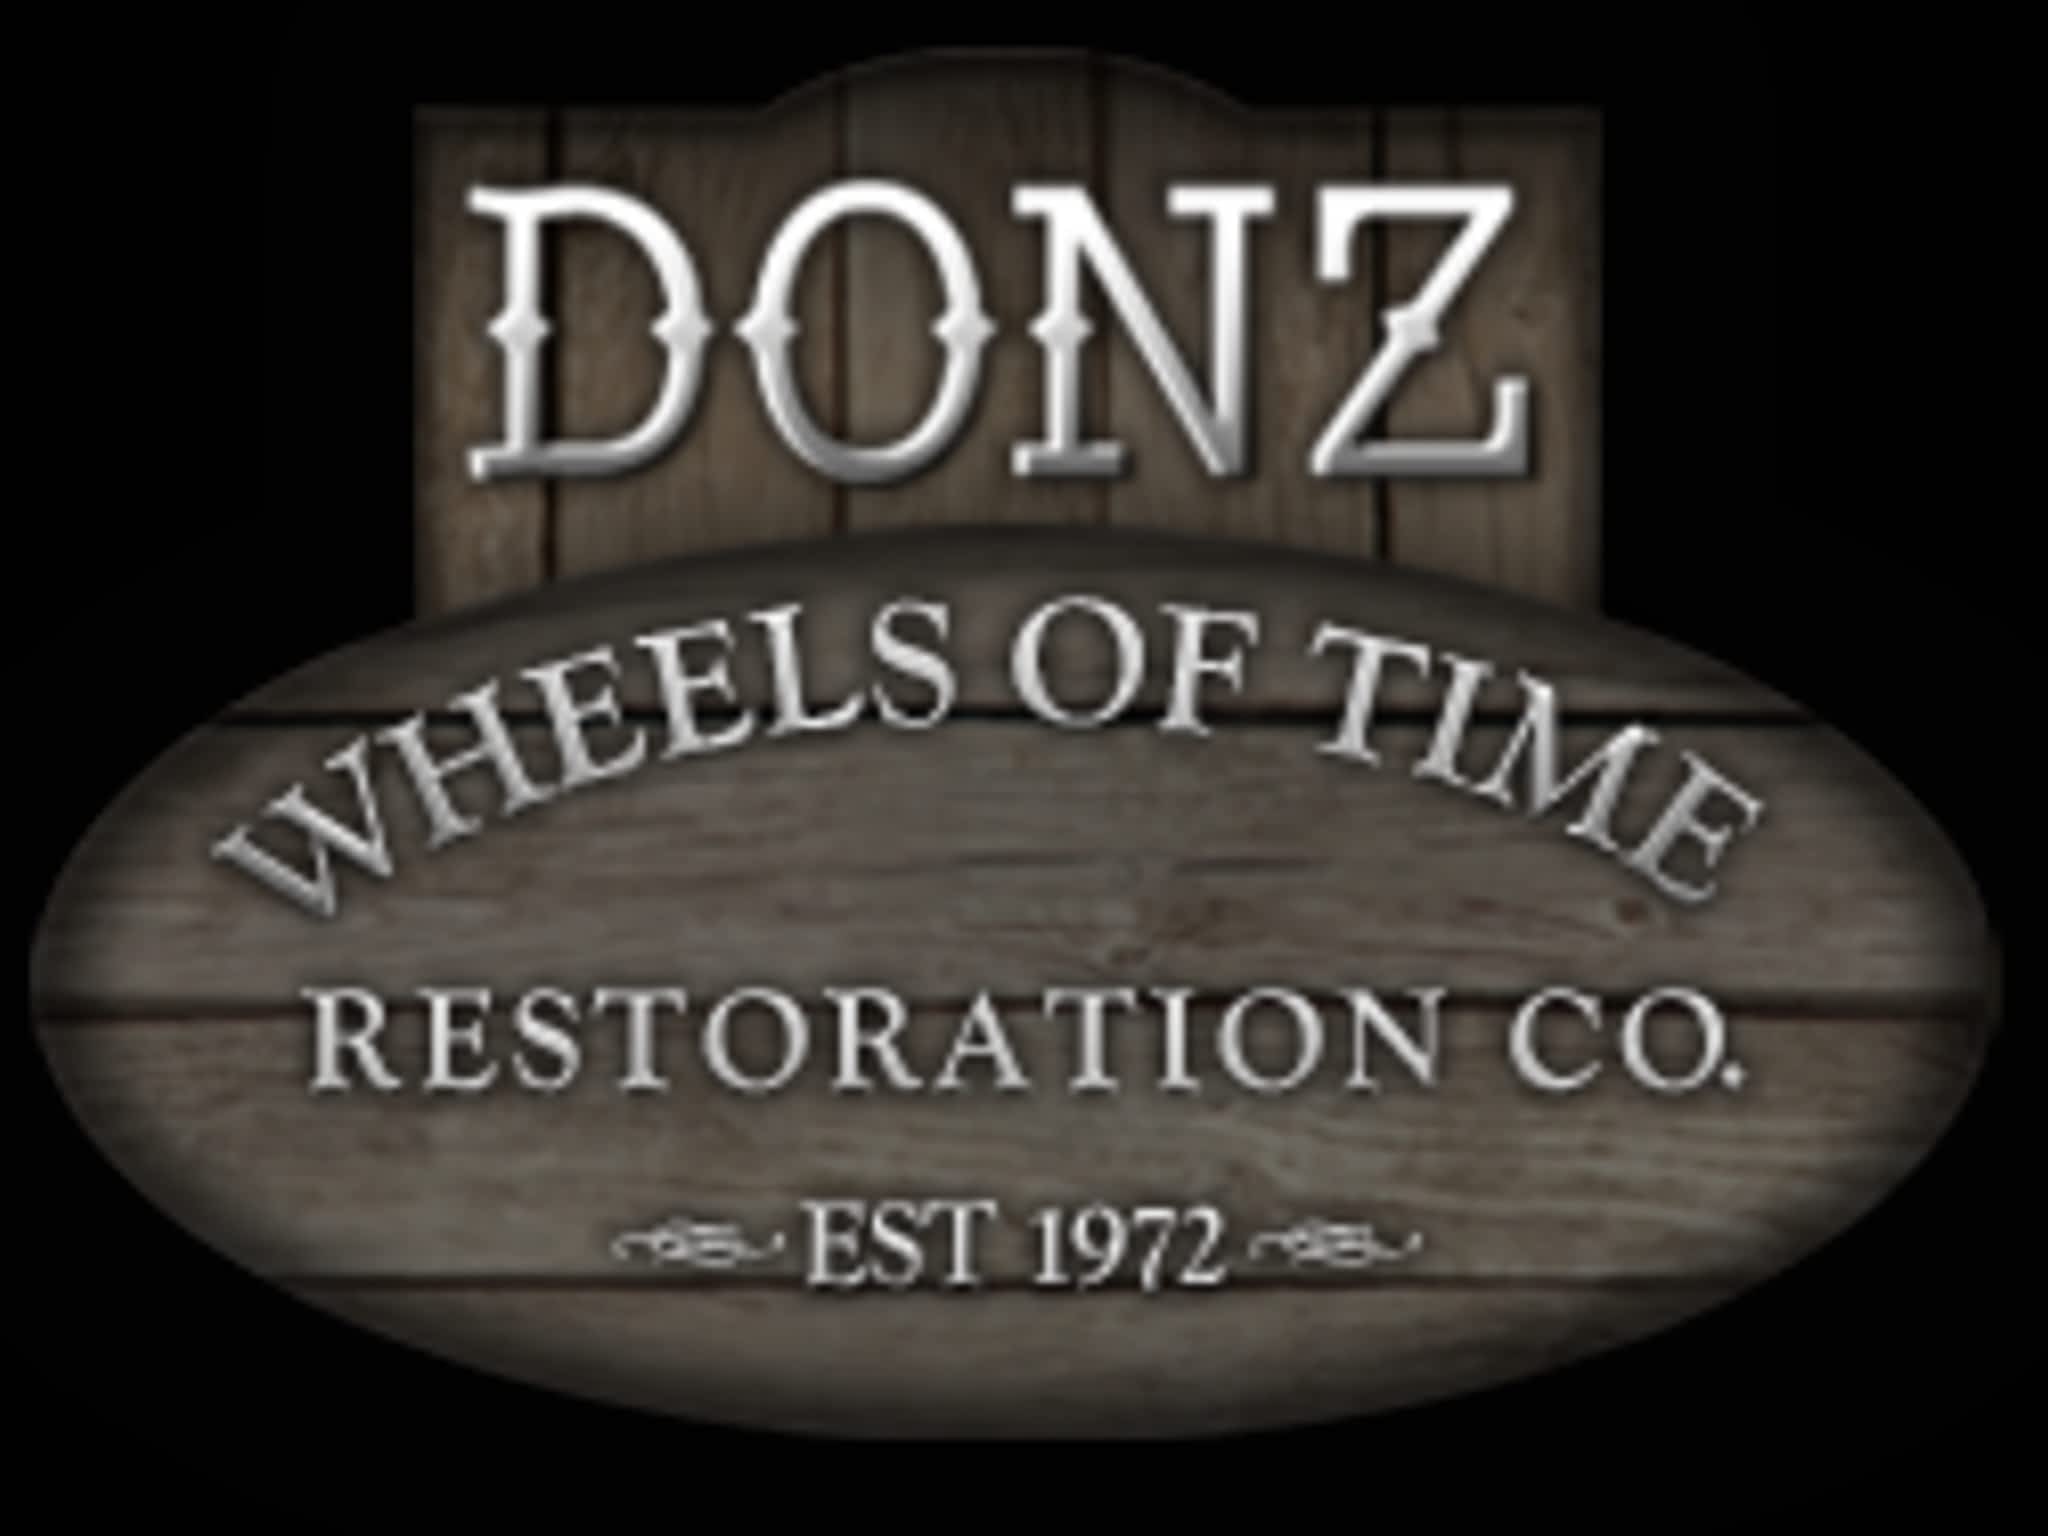 photo Donz' Wheels Of Time Restoration